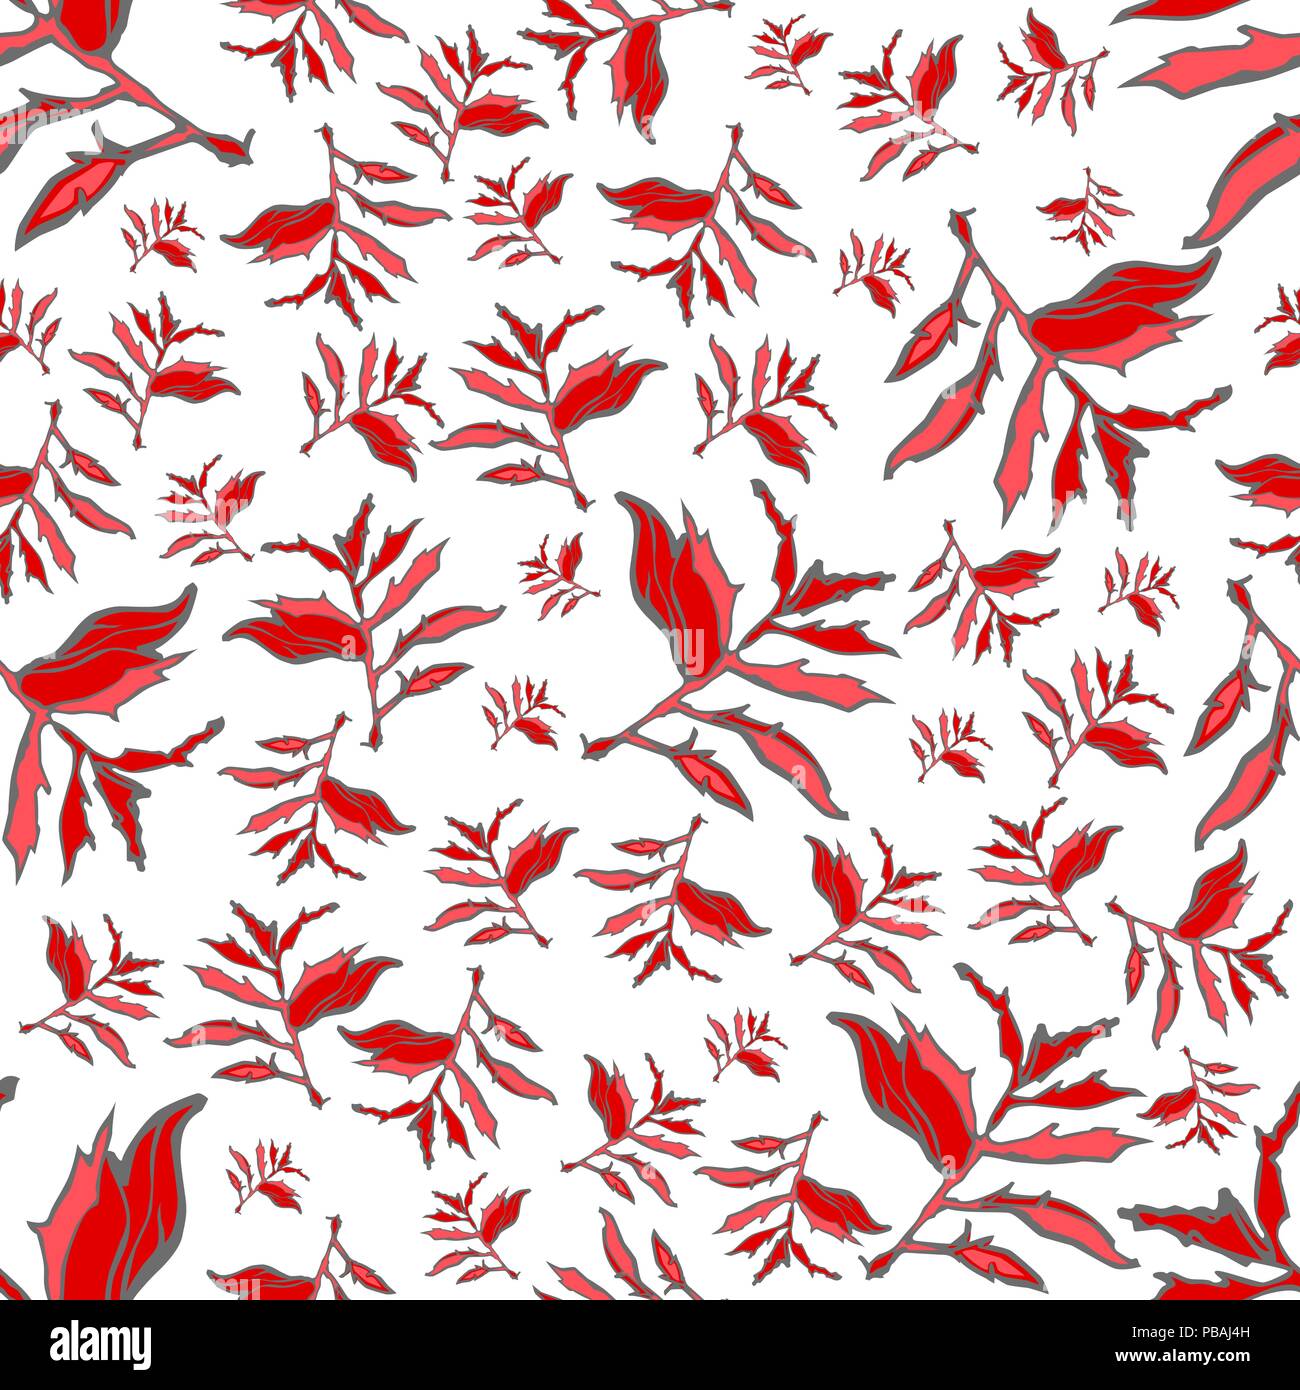 Floral seamless pattern. Red and white fabric. Vector texture. Square format. Stock Vector